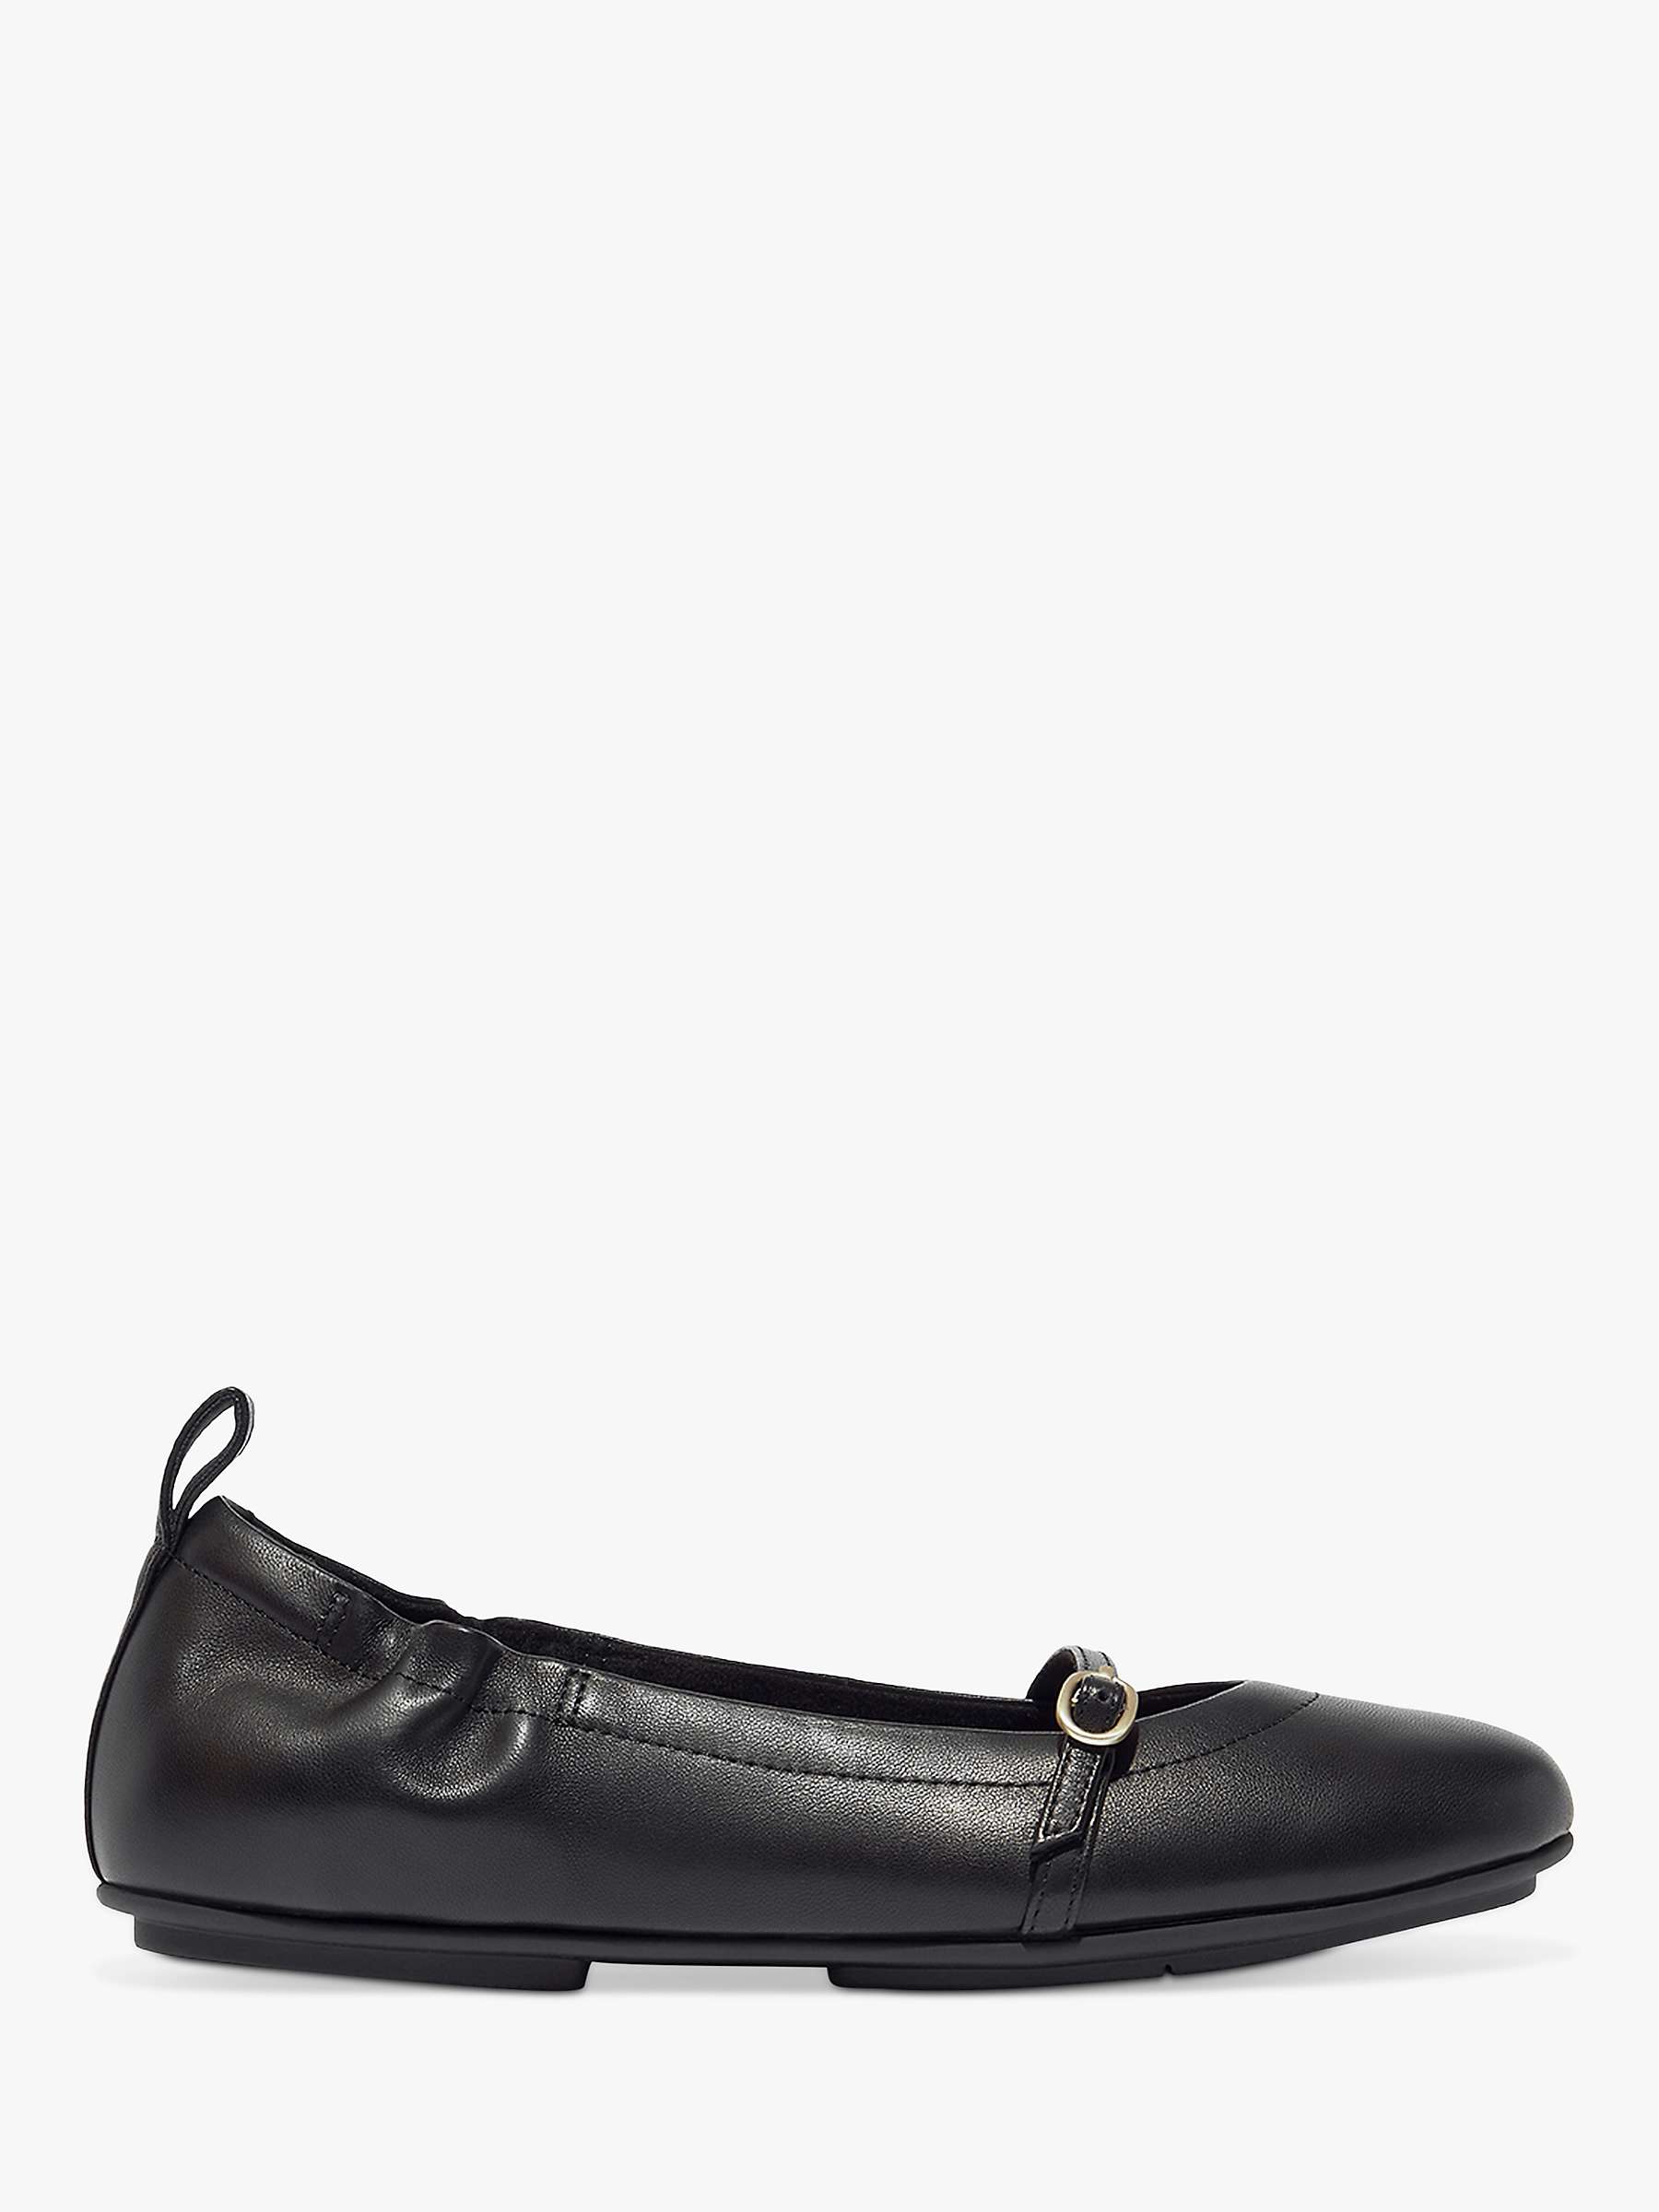 Buy FitFlop Allegro Buckle Mary Jane Leather Shoes, Black Online at johnlewis.com